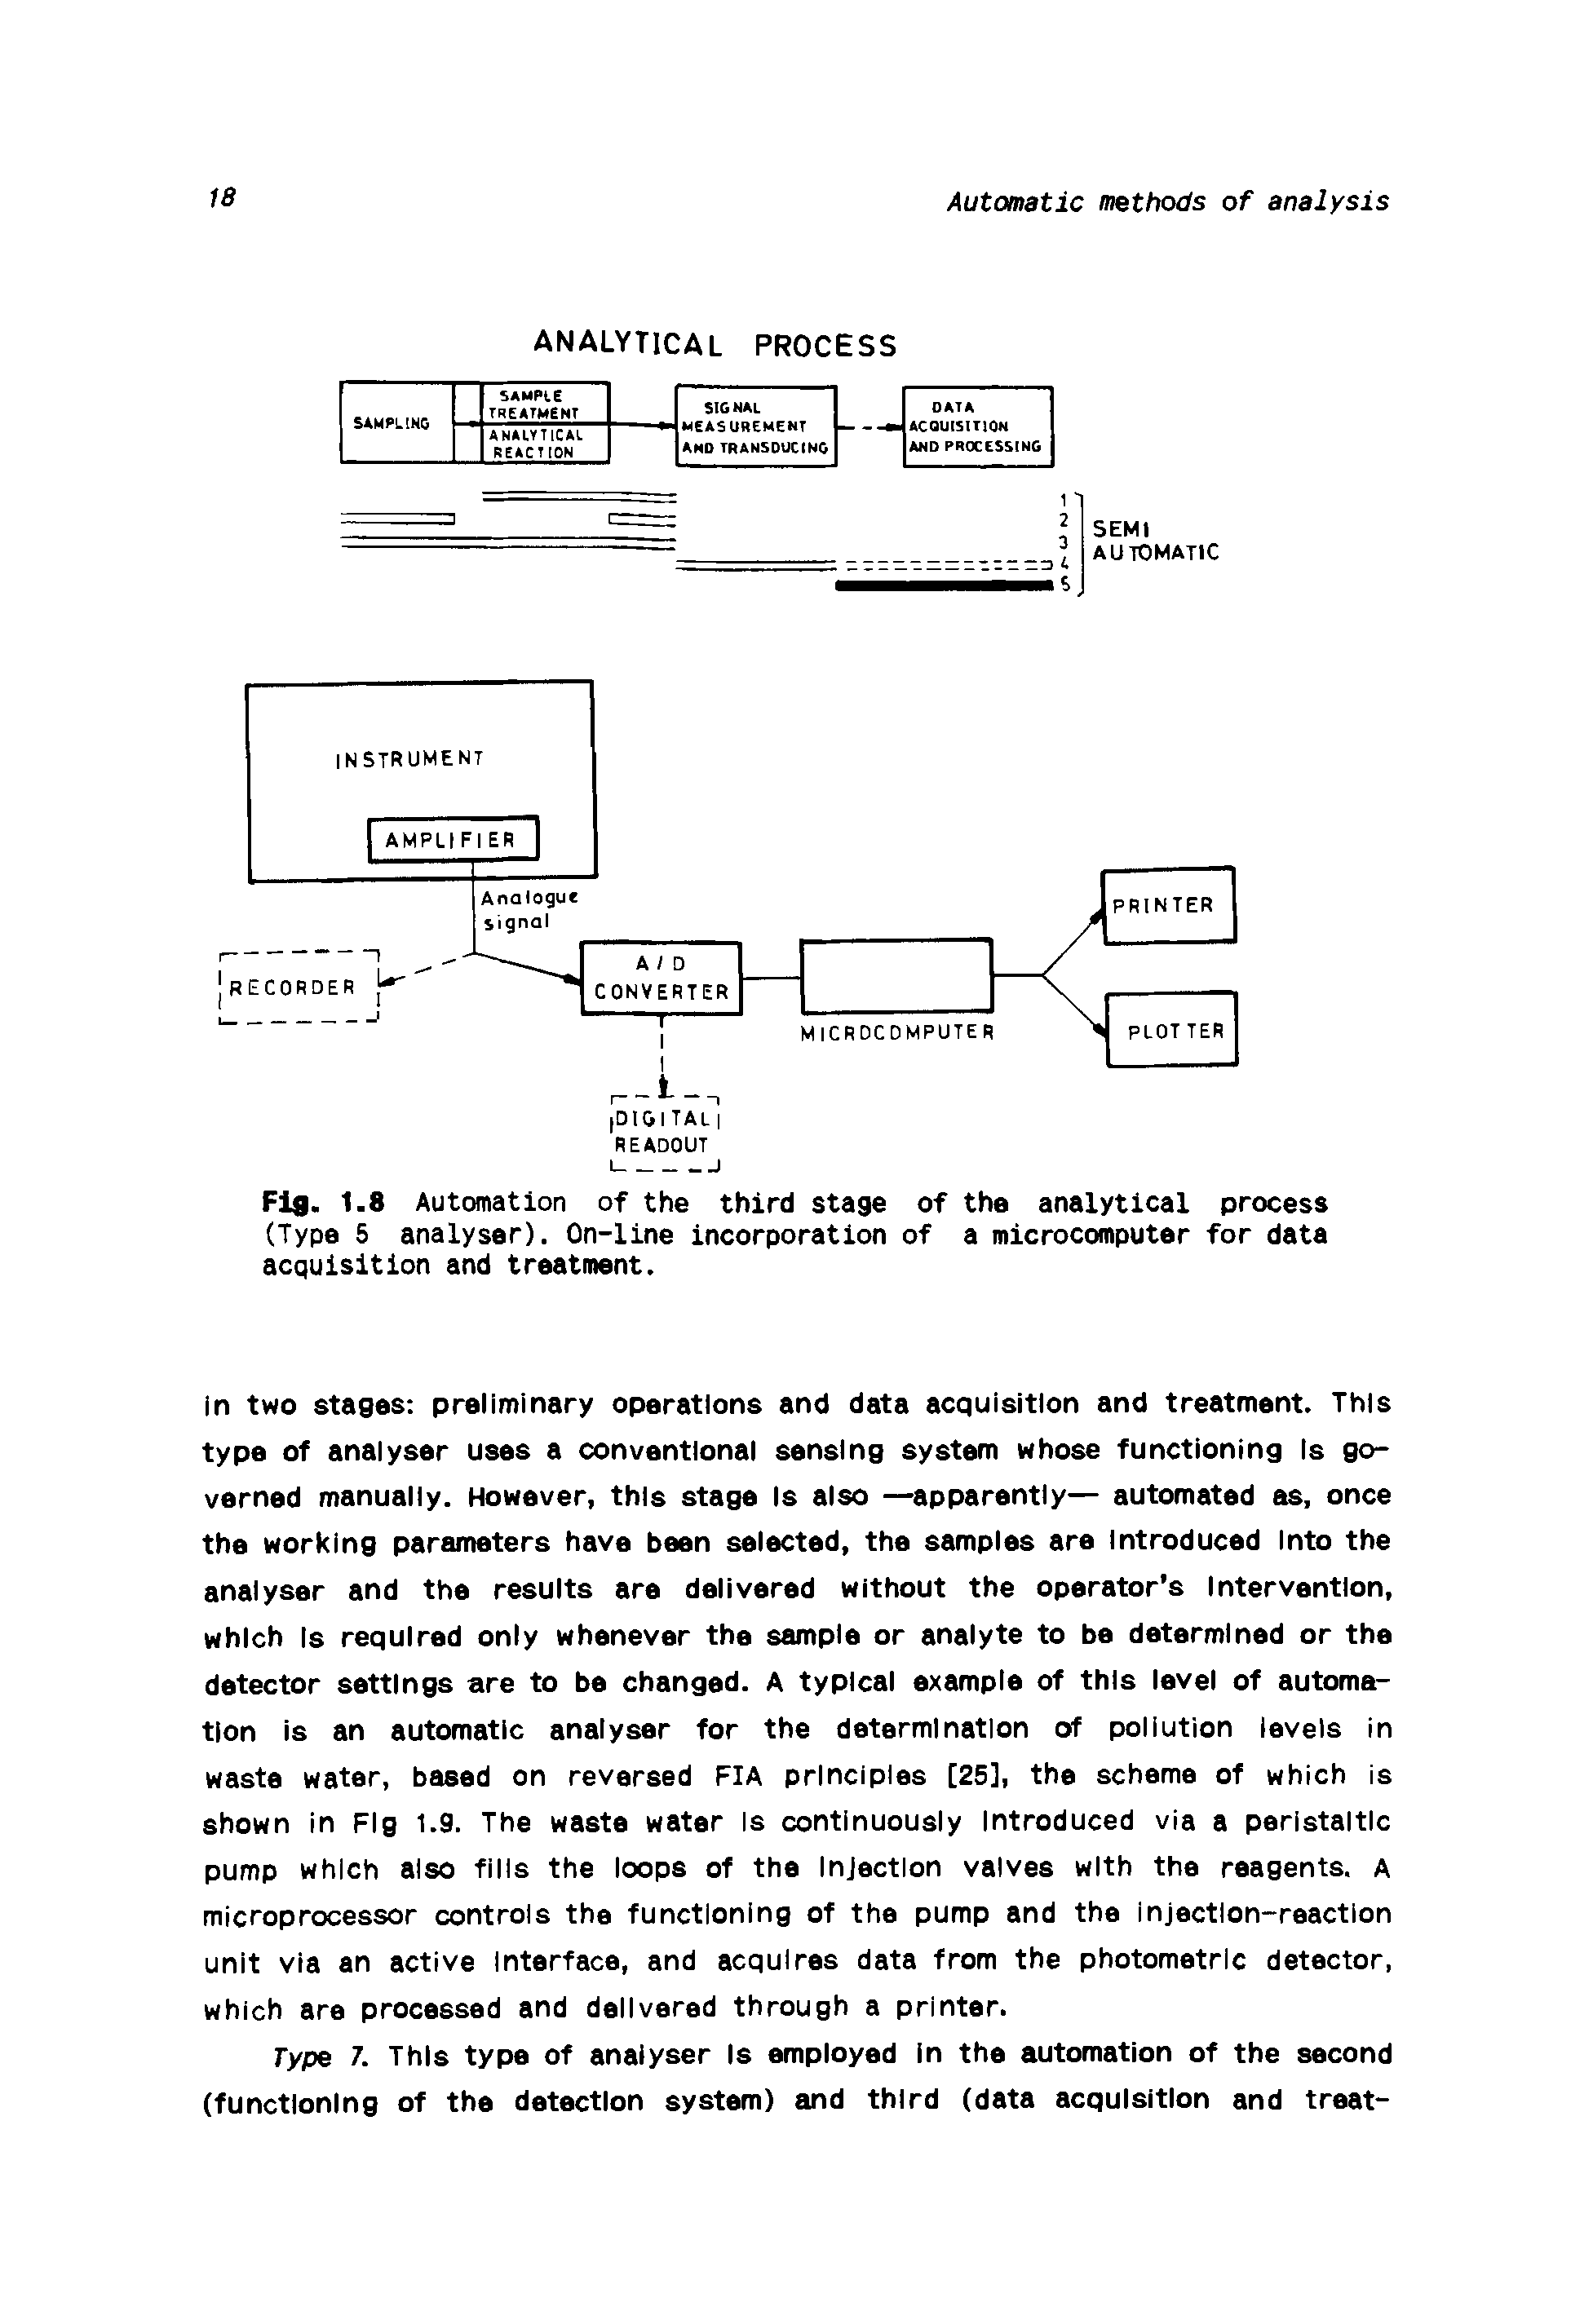 Fig. 1.8 Automation of the third stage of the analytical process (Type 5 analyser). On-line incorporation of a microcomputer for data acquisition and treatment.